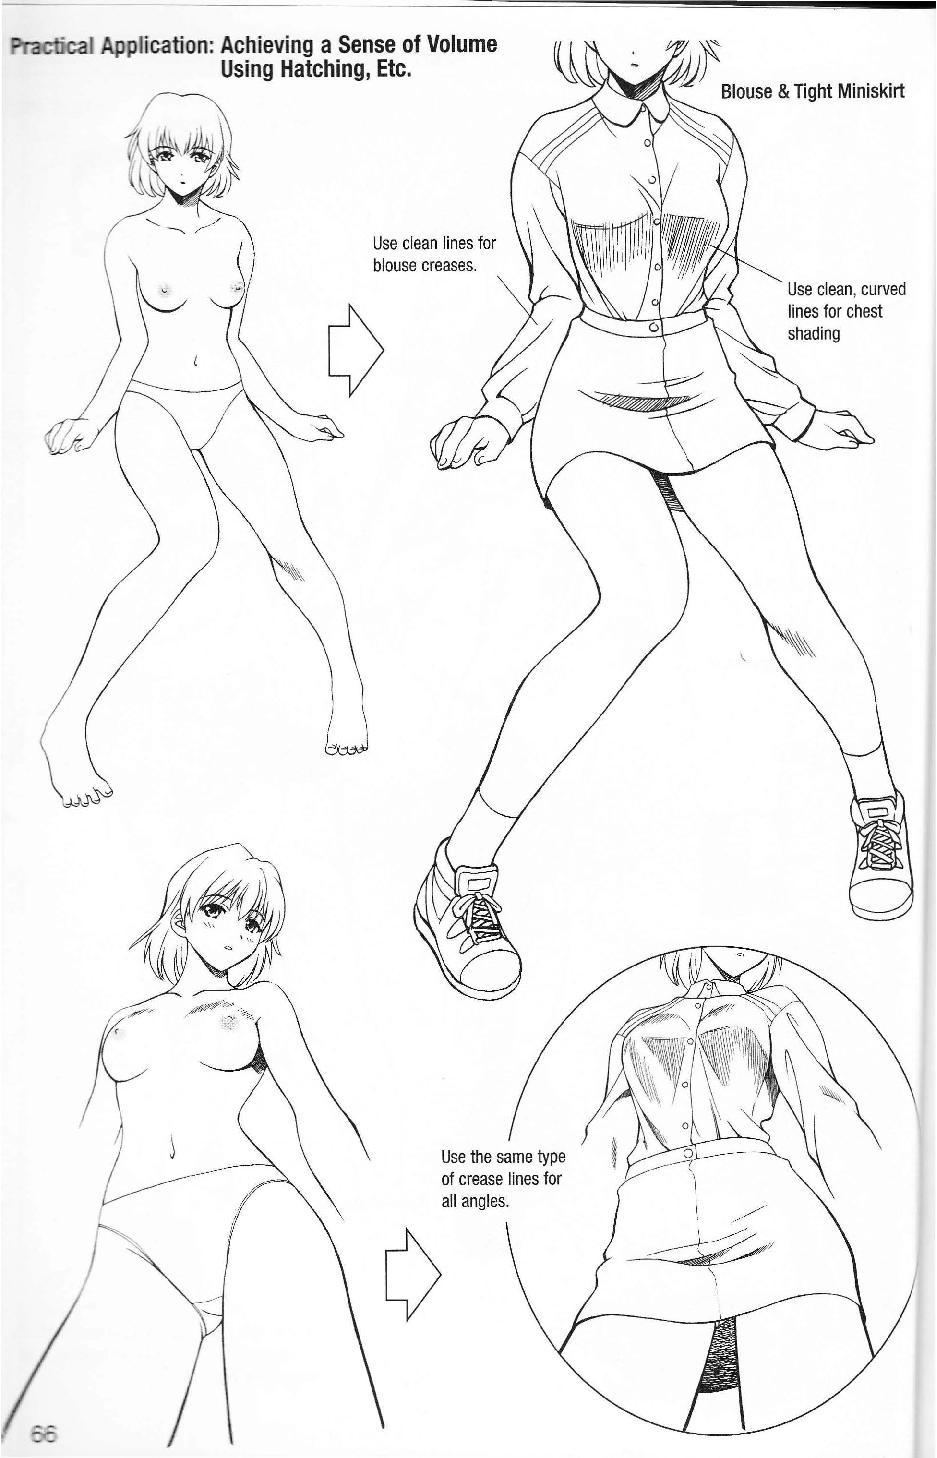 More How to Draw Manga Vol. 2 - Penning Characters 67